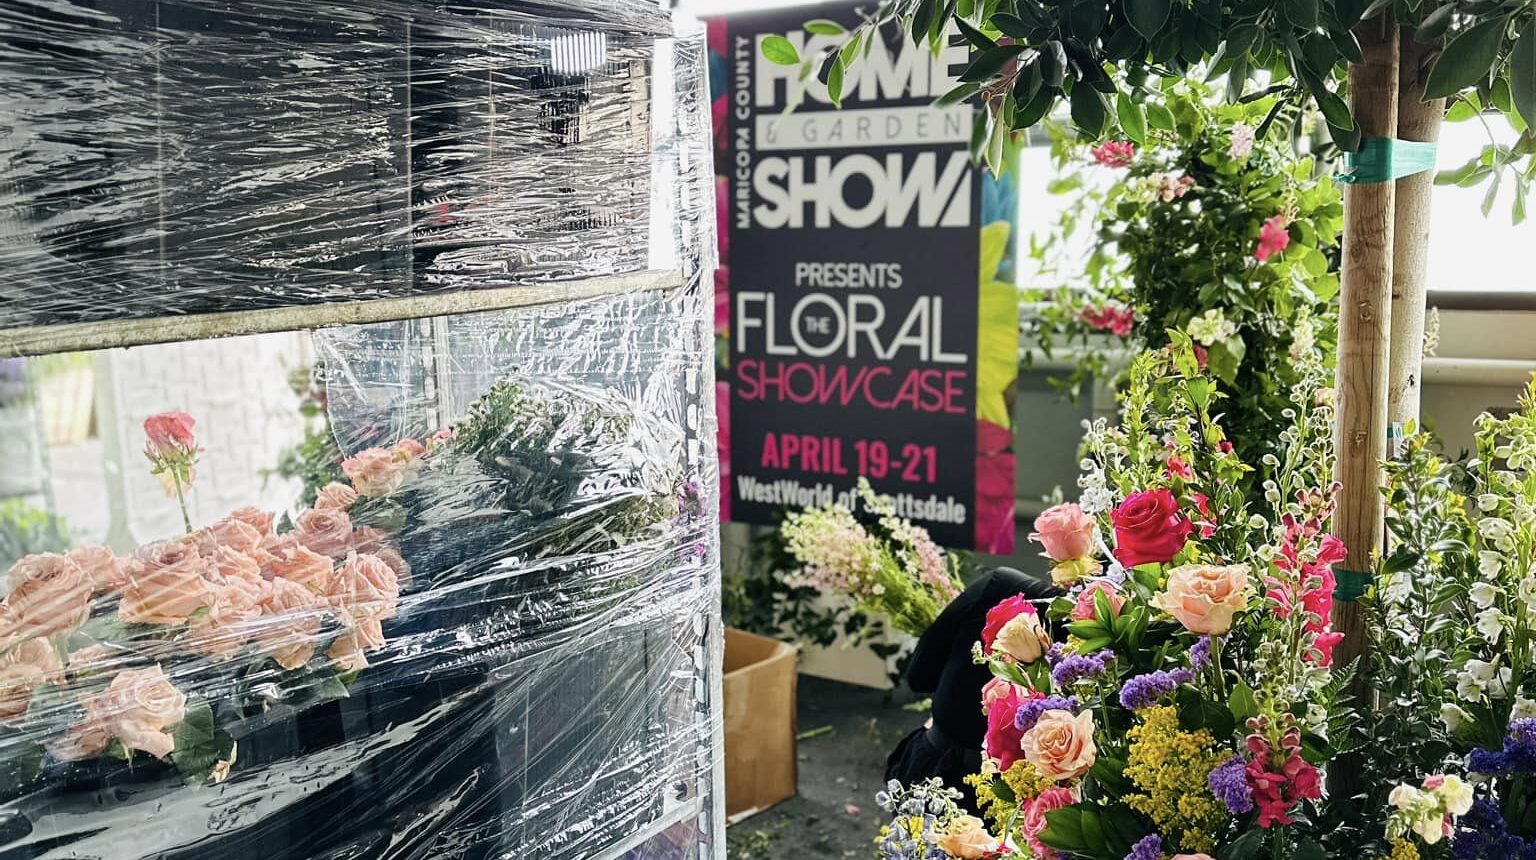 Preparations are underway for the Home & Garden Show's Floral Showcase at WestWorld of Scottsdale. ...